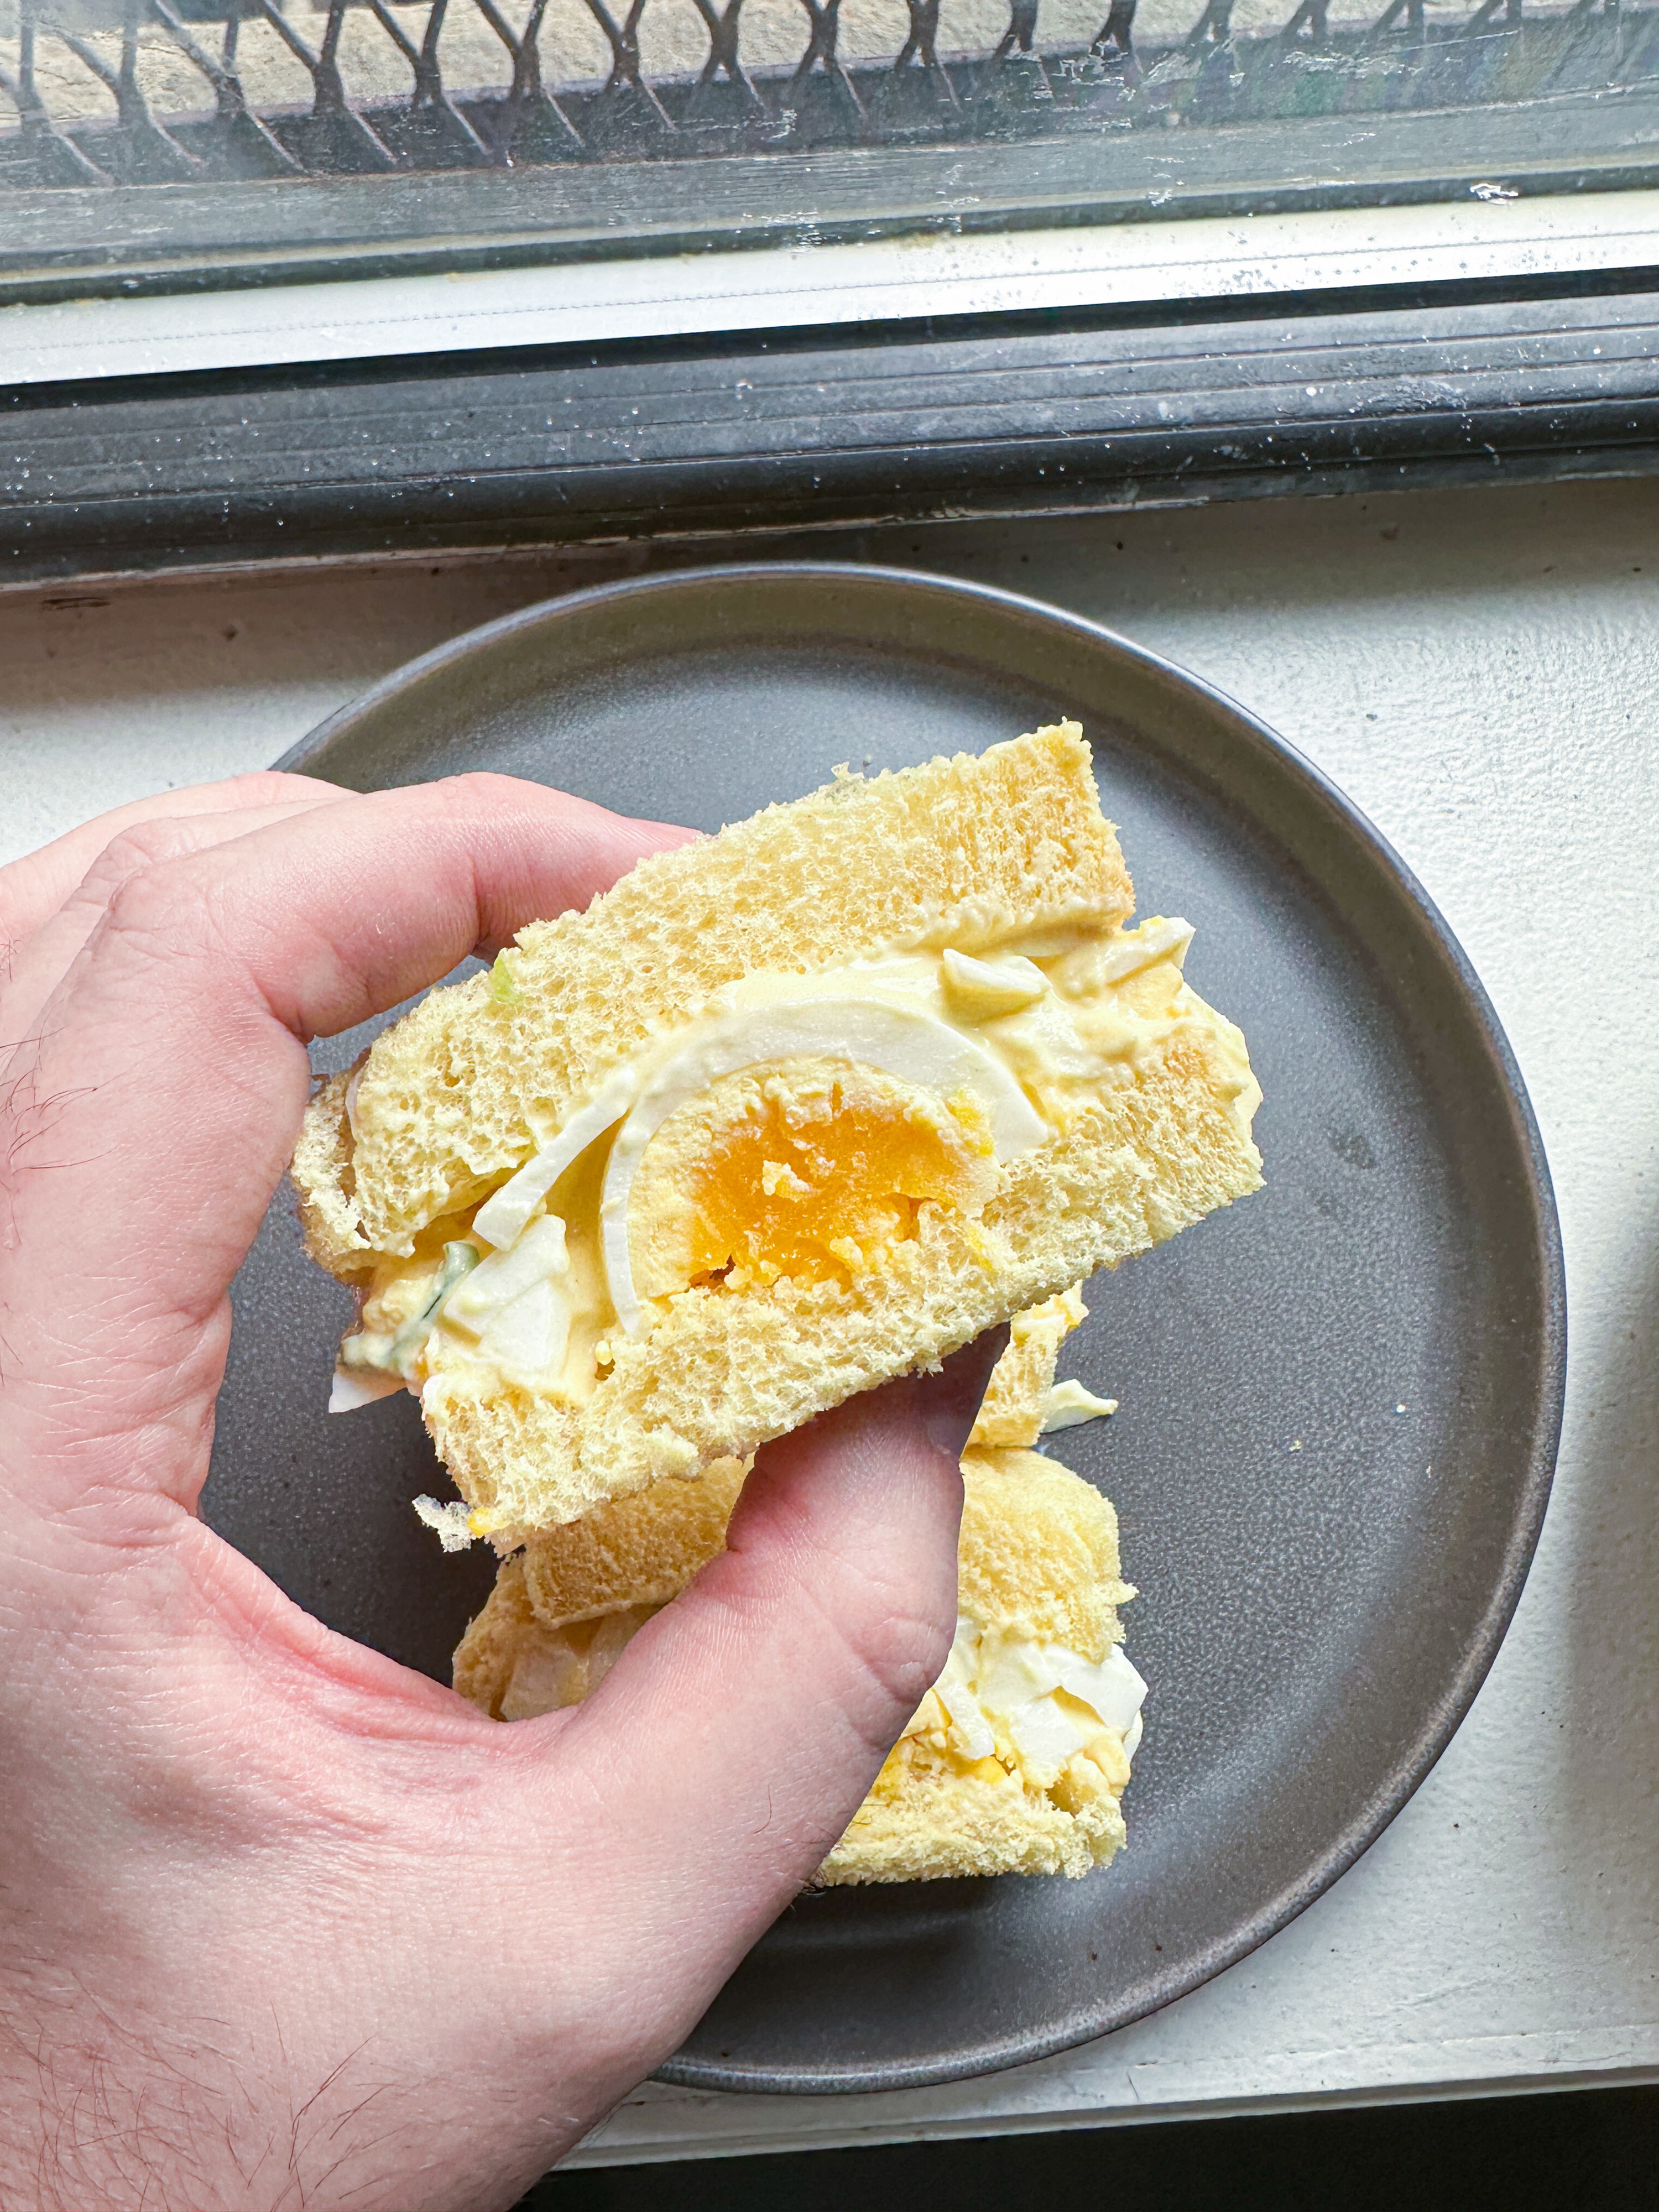 author holding a japanese style egg sandwich cross section with golden yolk revealed